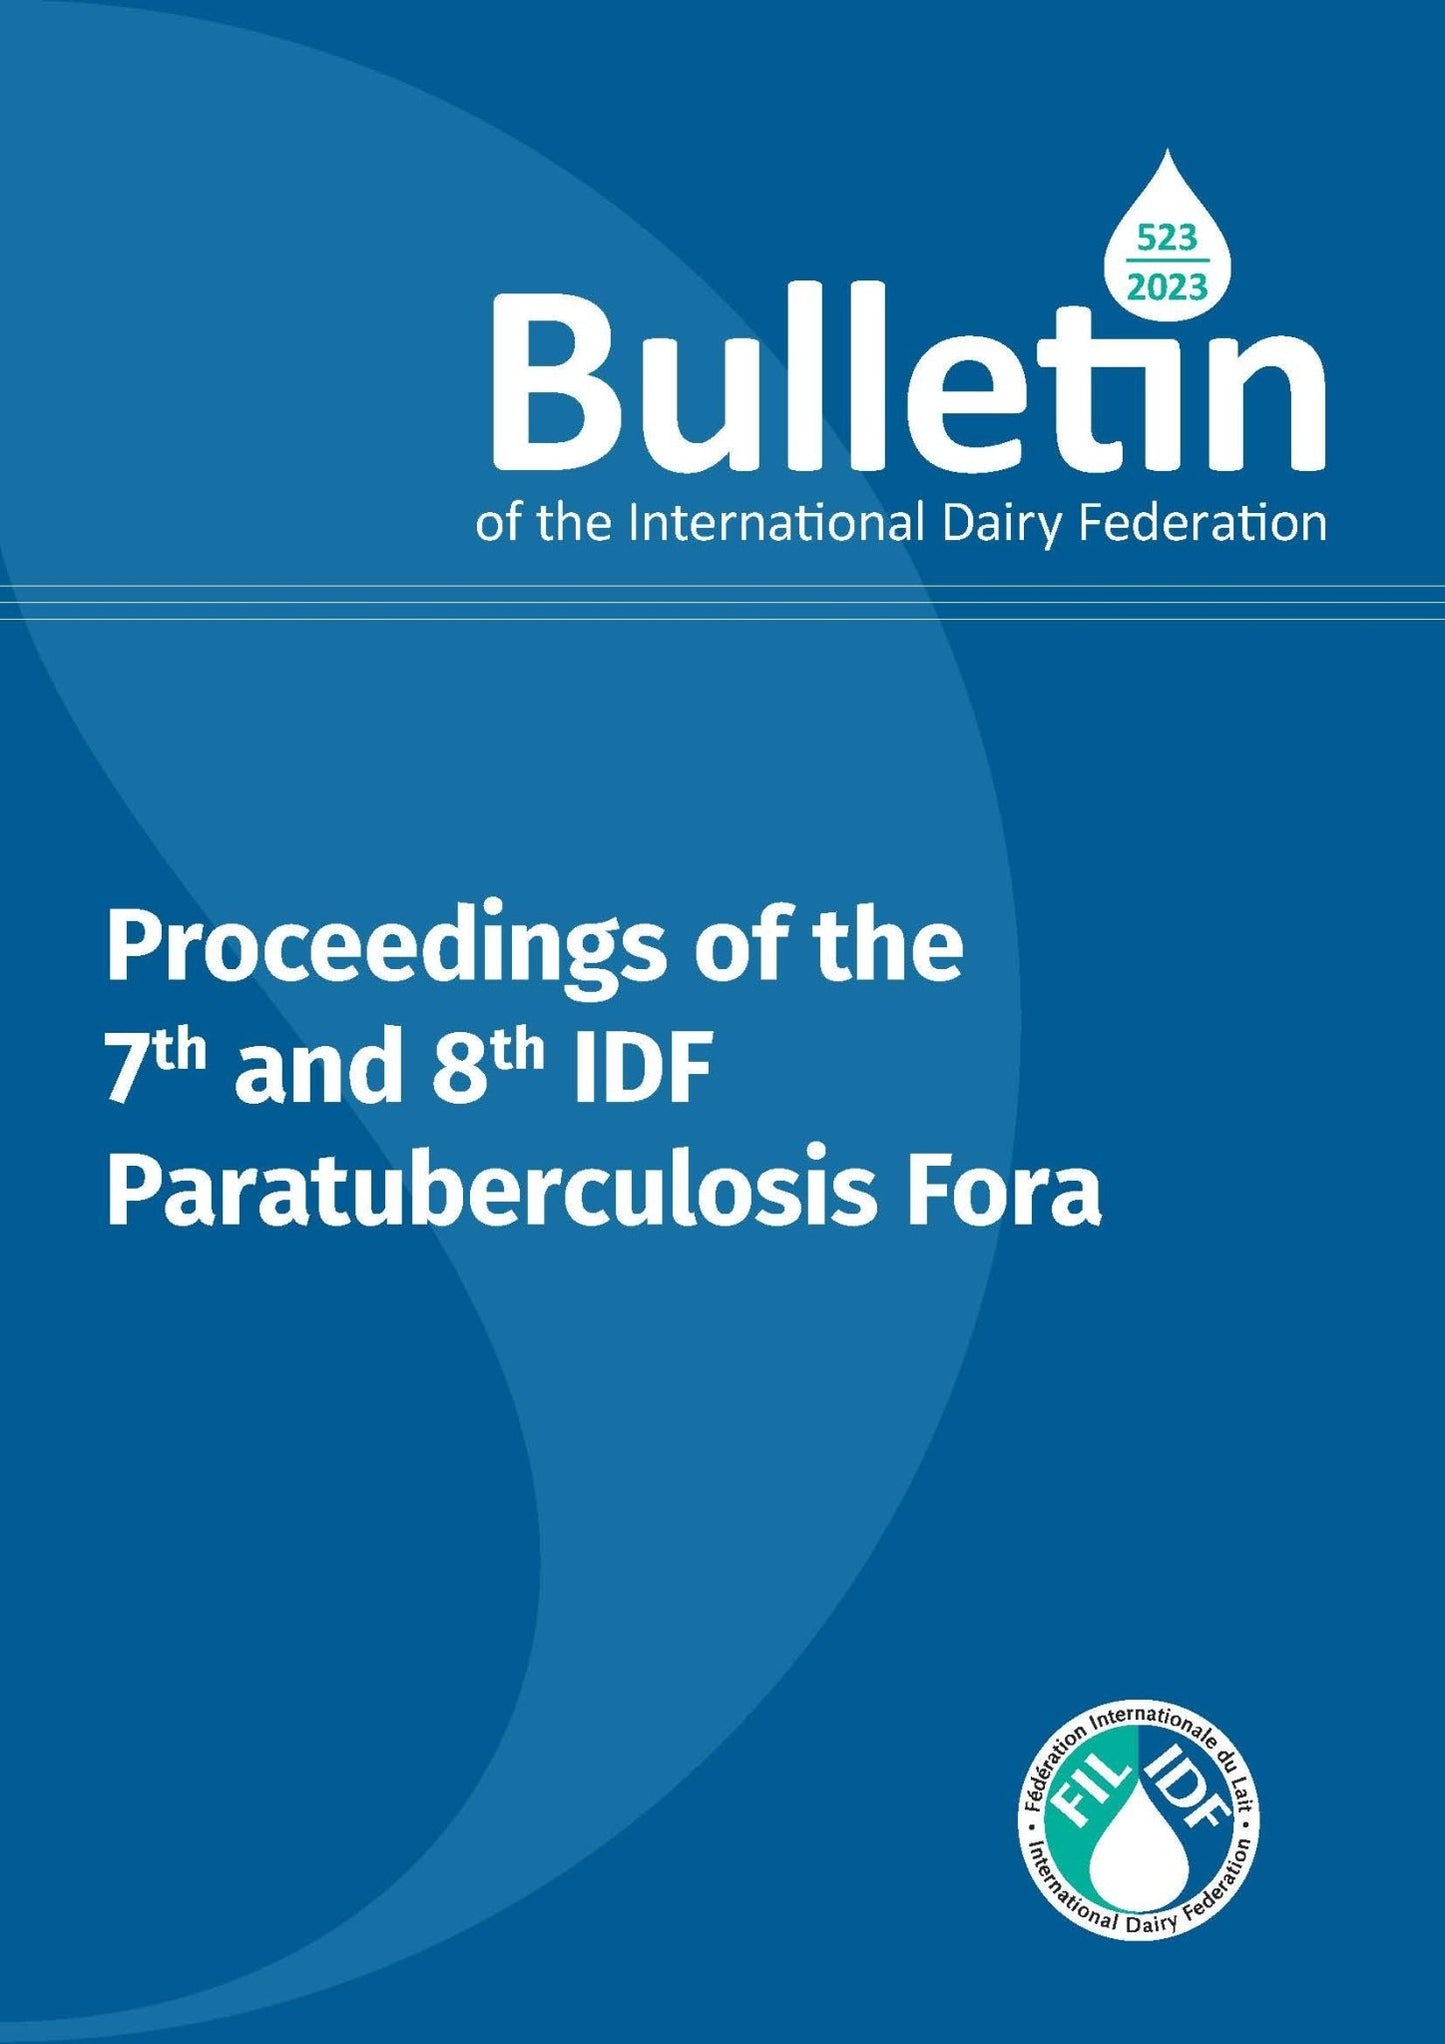 Bulletin of the IDF N°523/2023: Proceedings of the 7th and 8th IDF Paratuberculosis Fora - FIL-IDF